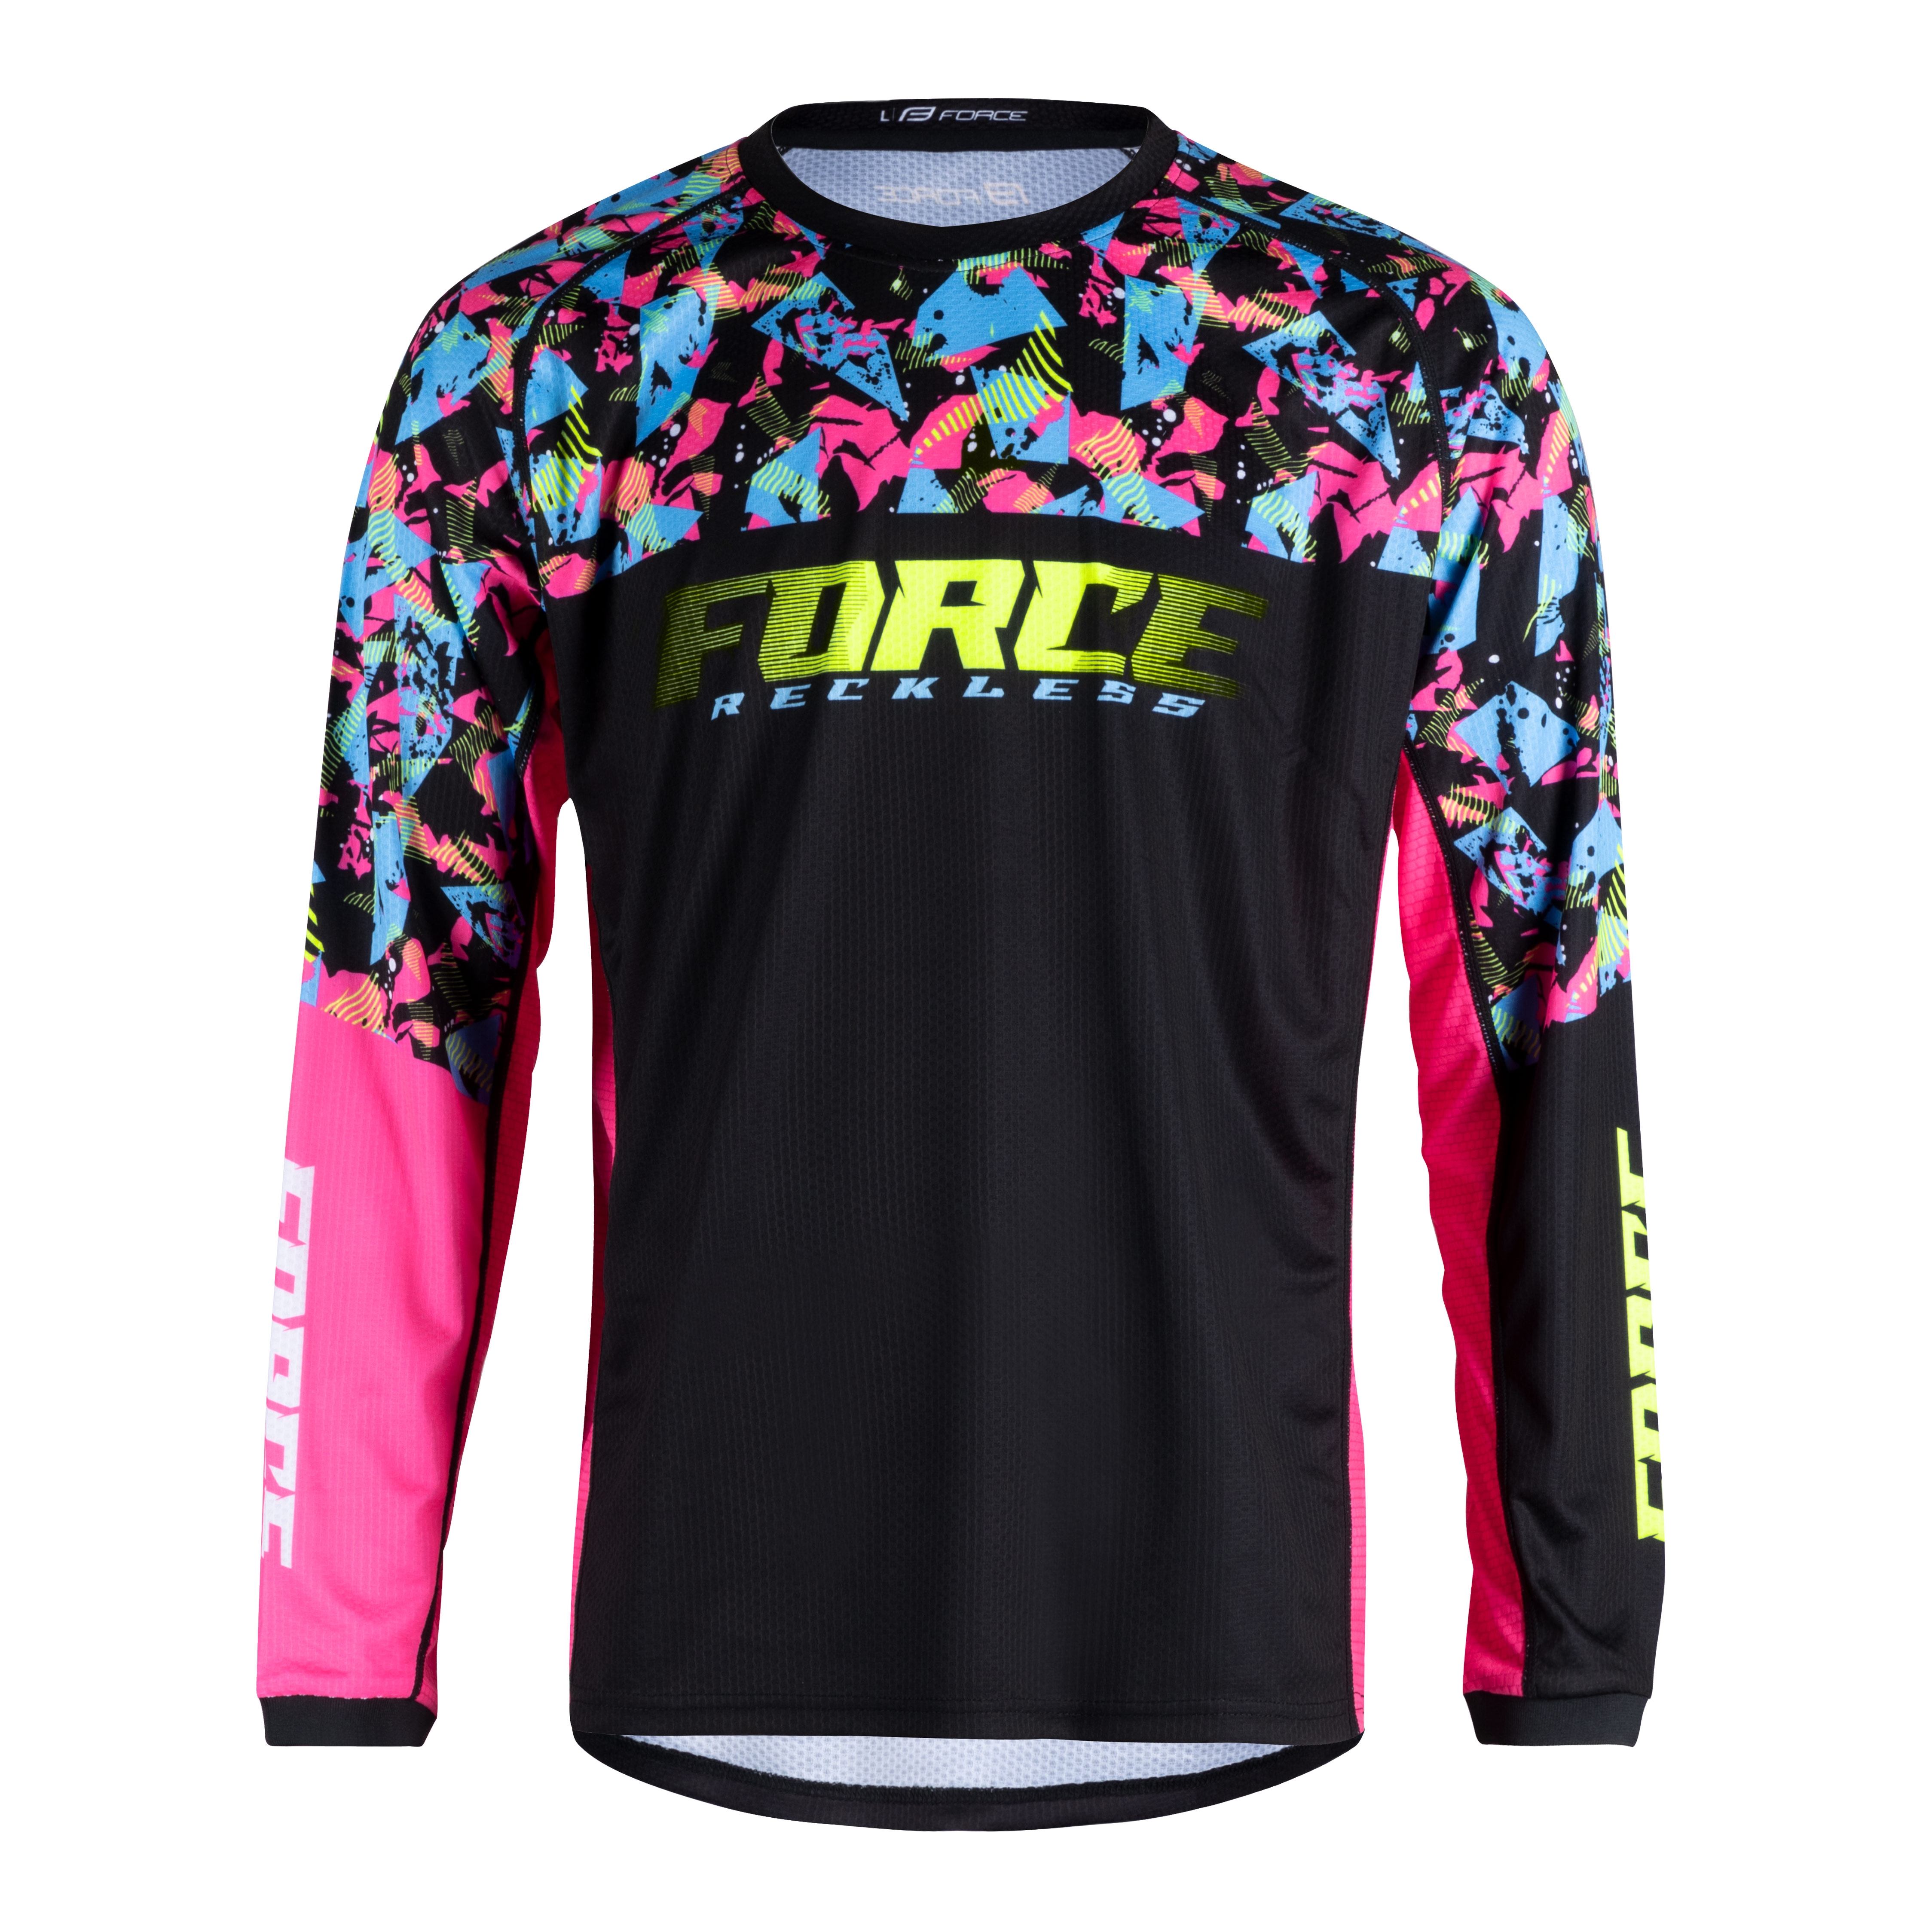 dres F RECKLESS dl. rukv, erno-rovo-fluo 3XL